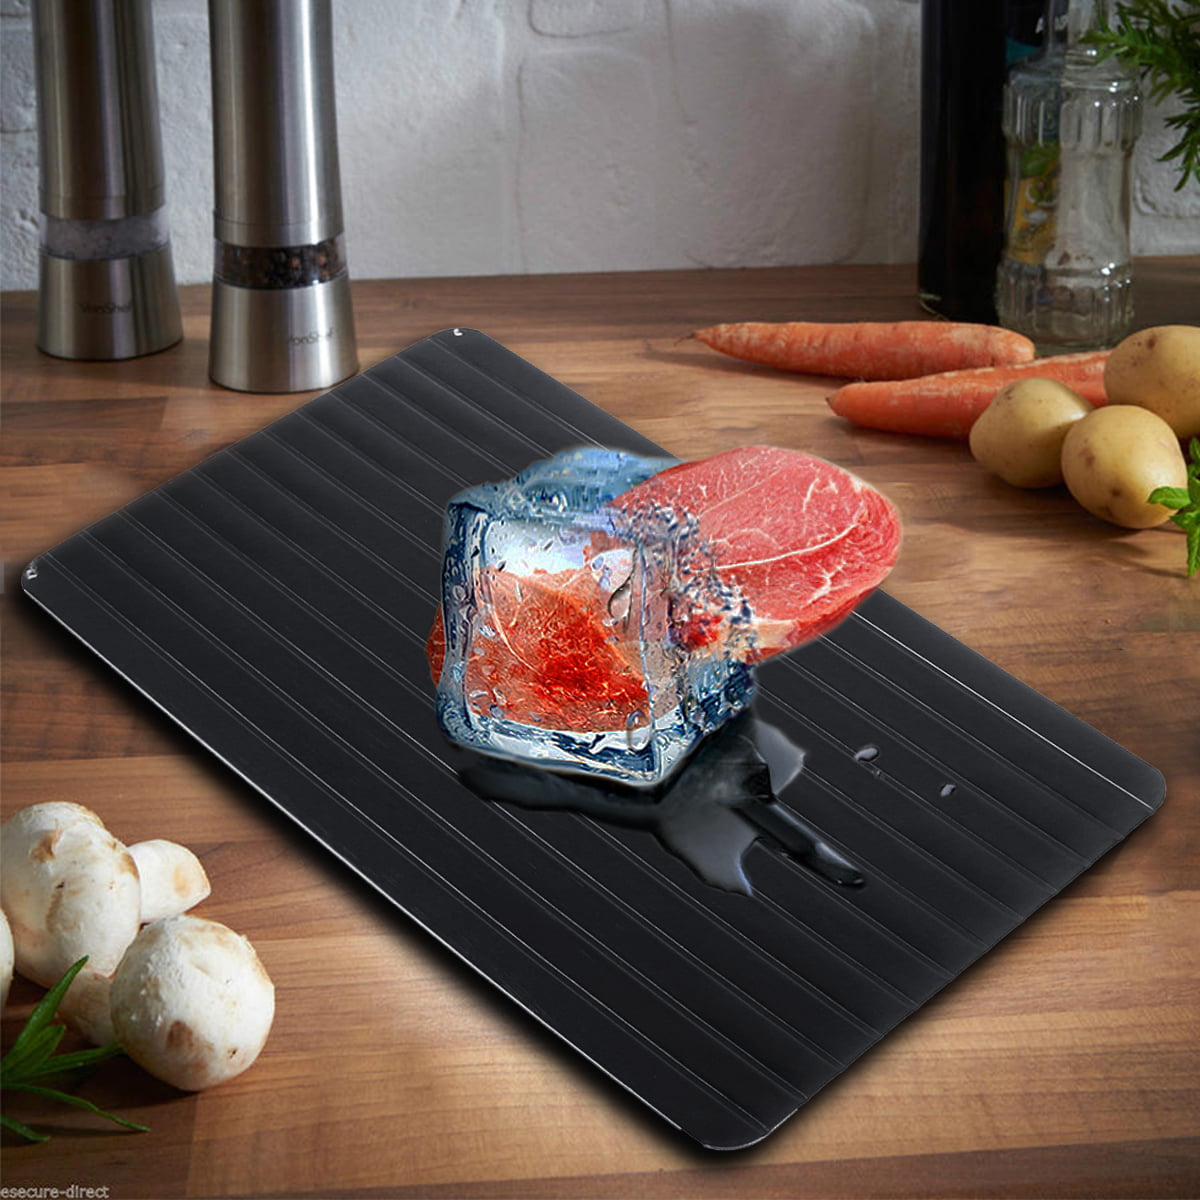 No Microwave,100% Natural-Non Stick & Dishwasher Safe No Electricity Required joyliveCY Quick Thaw Plate No Chemicals Aluminum Defrost Board Rapid Thawing Tray,Defrost Plate Thaws 